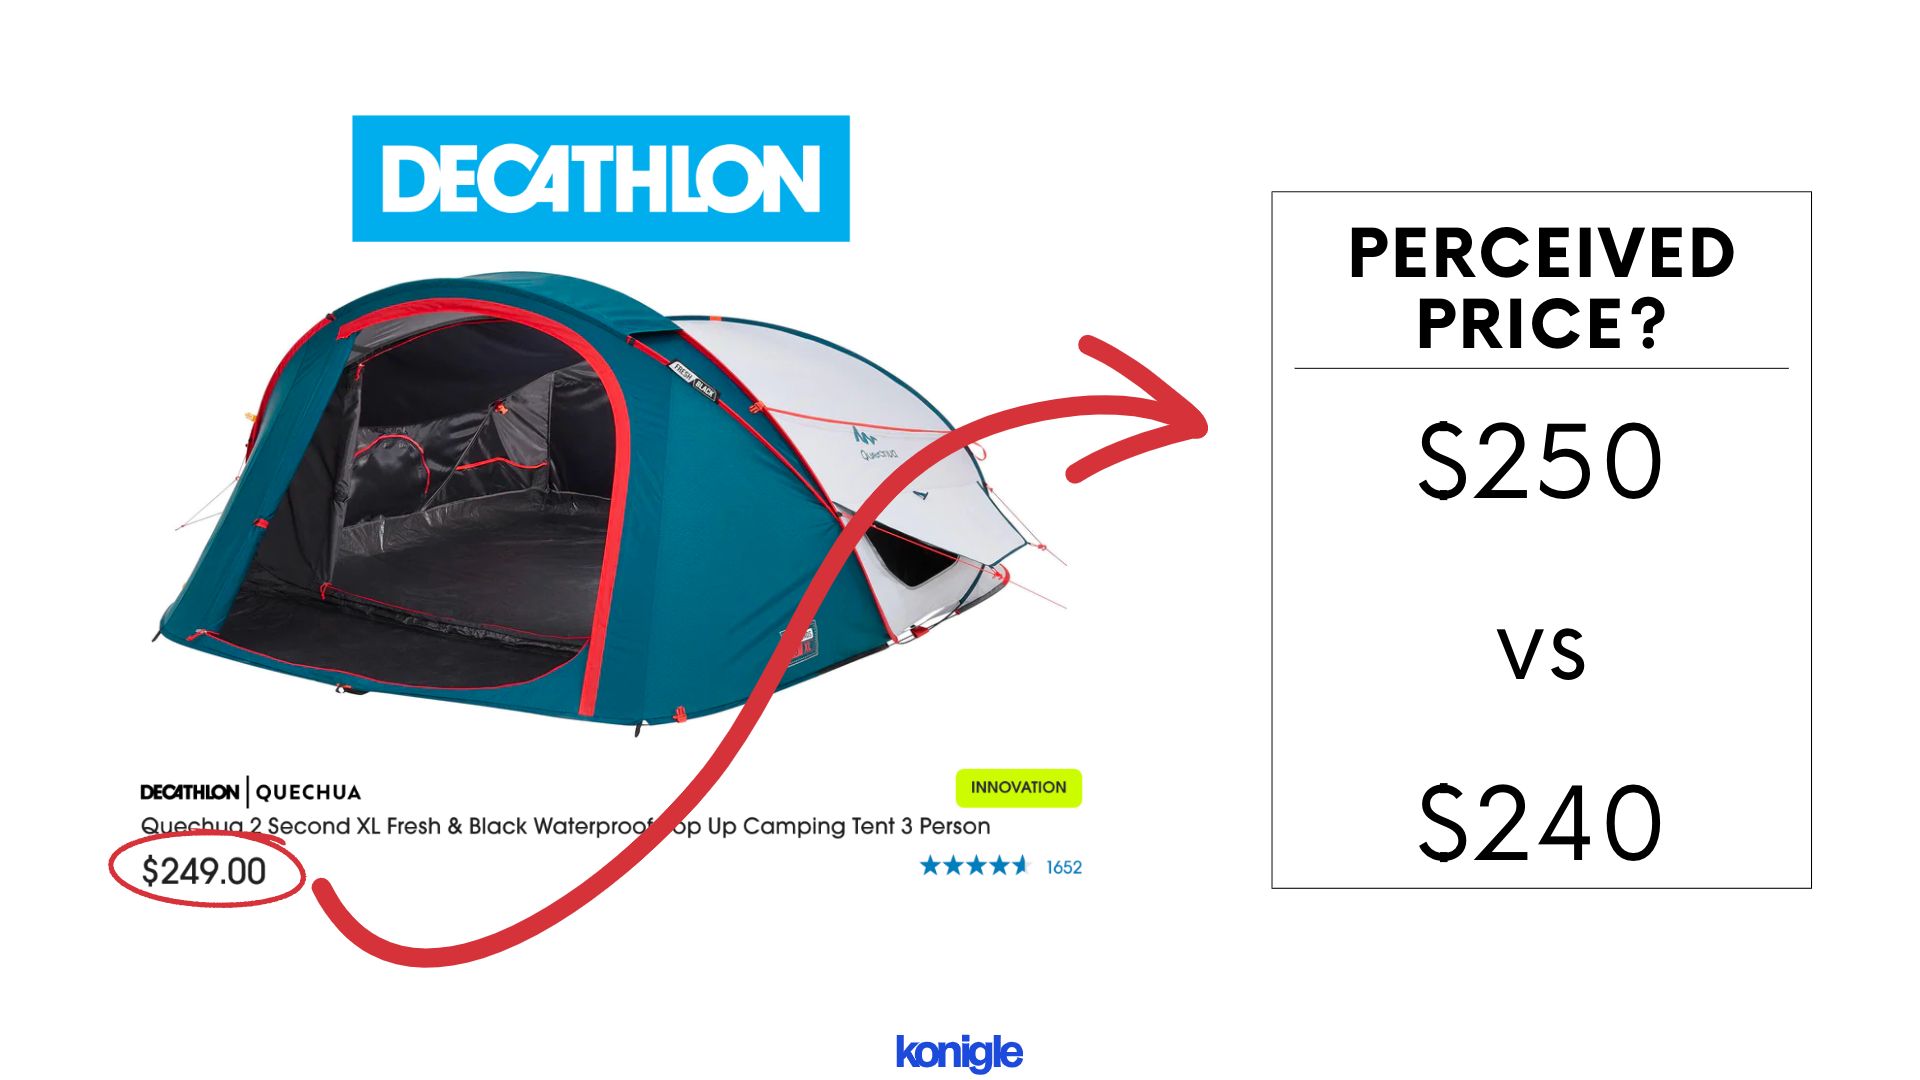 How Decathlon uses psychological pricing